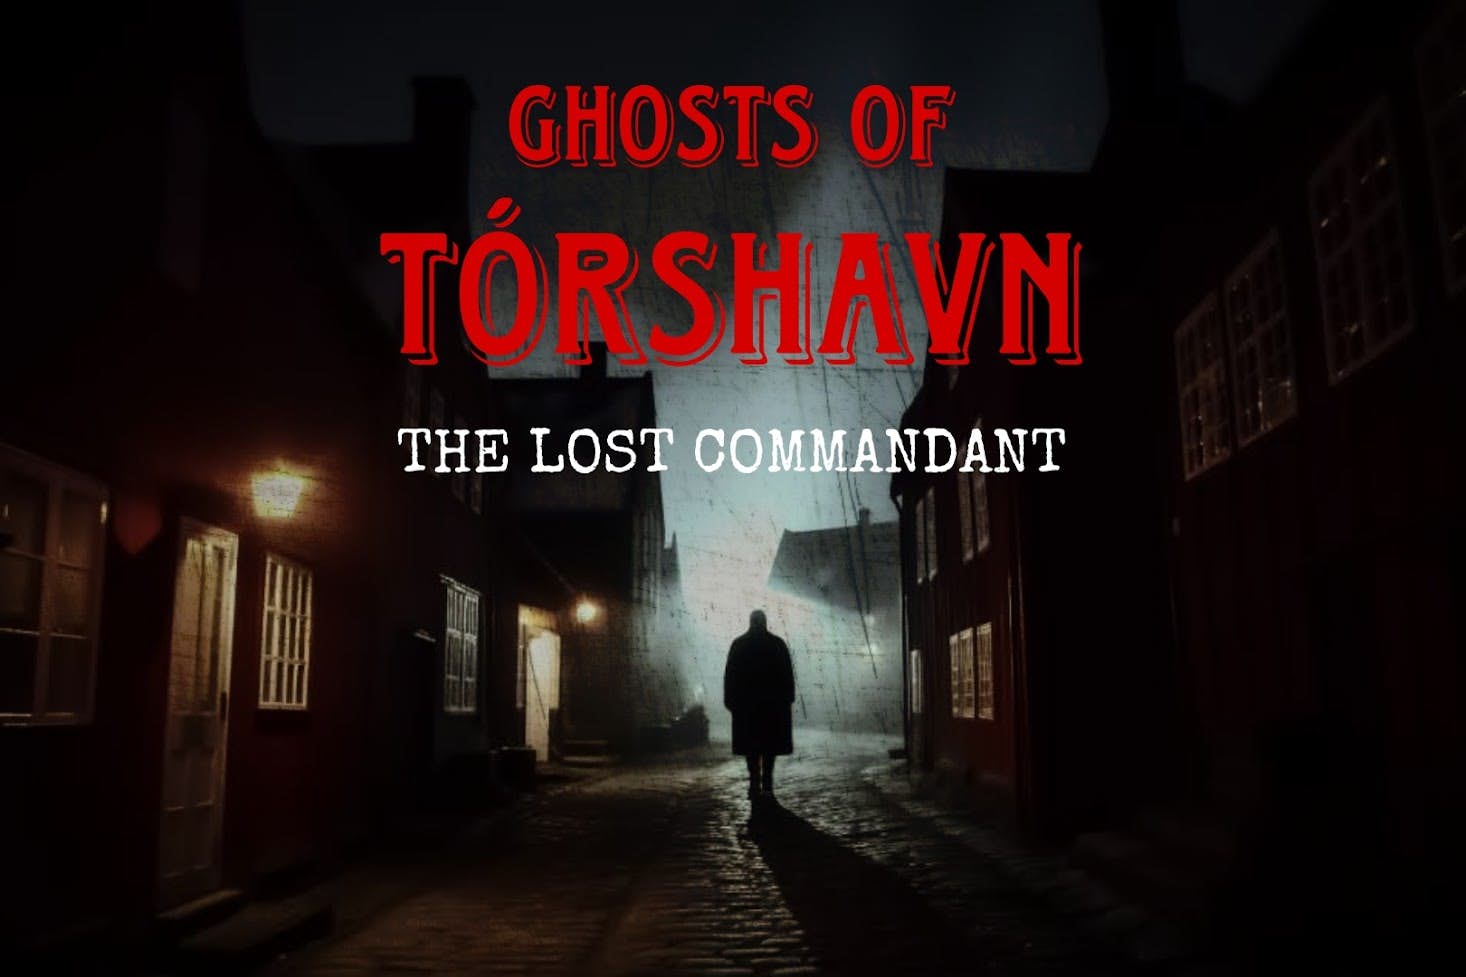 Ghosts of Thorshavn: The Lost Commandant image